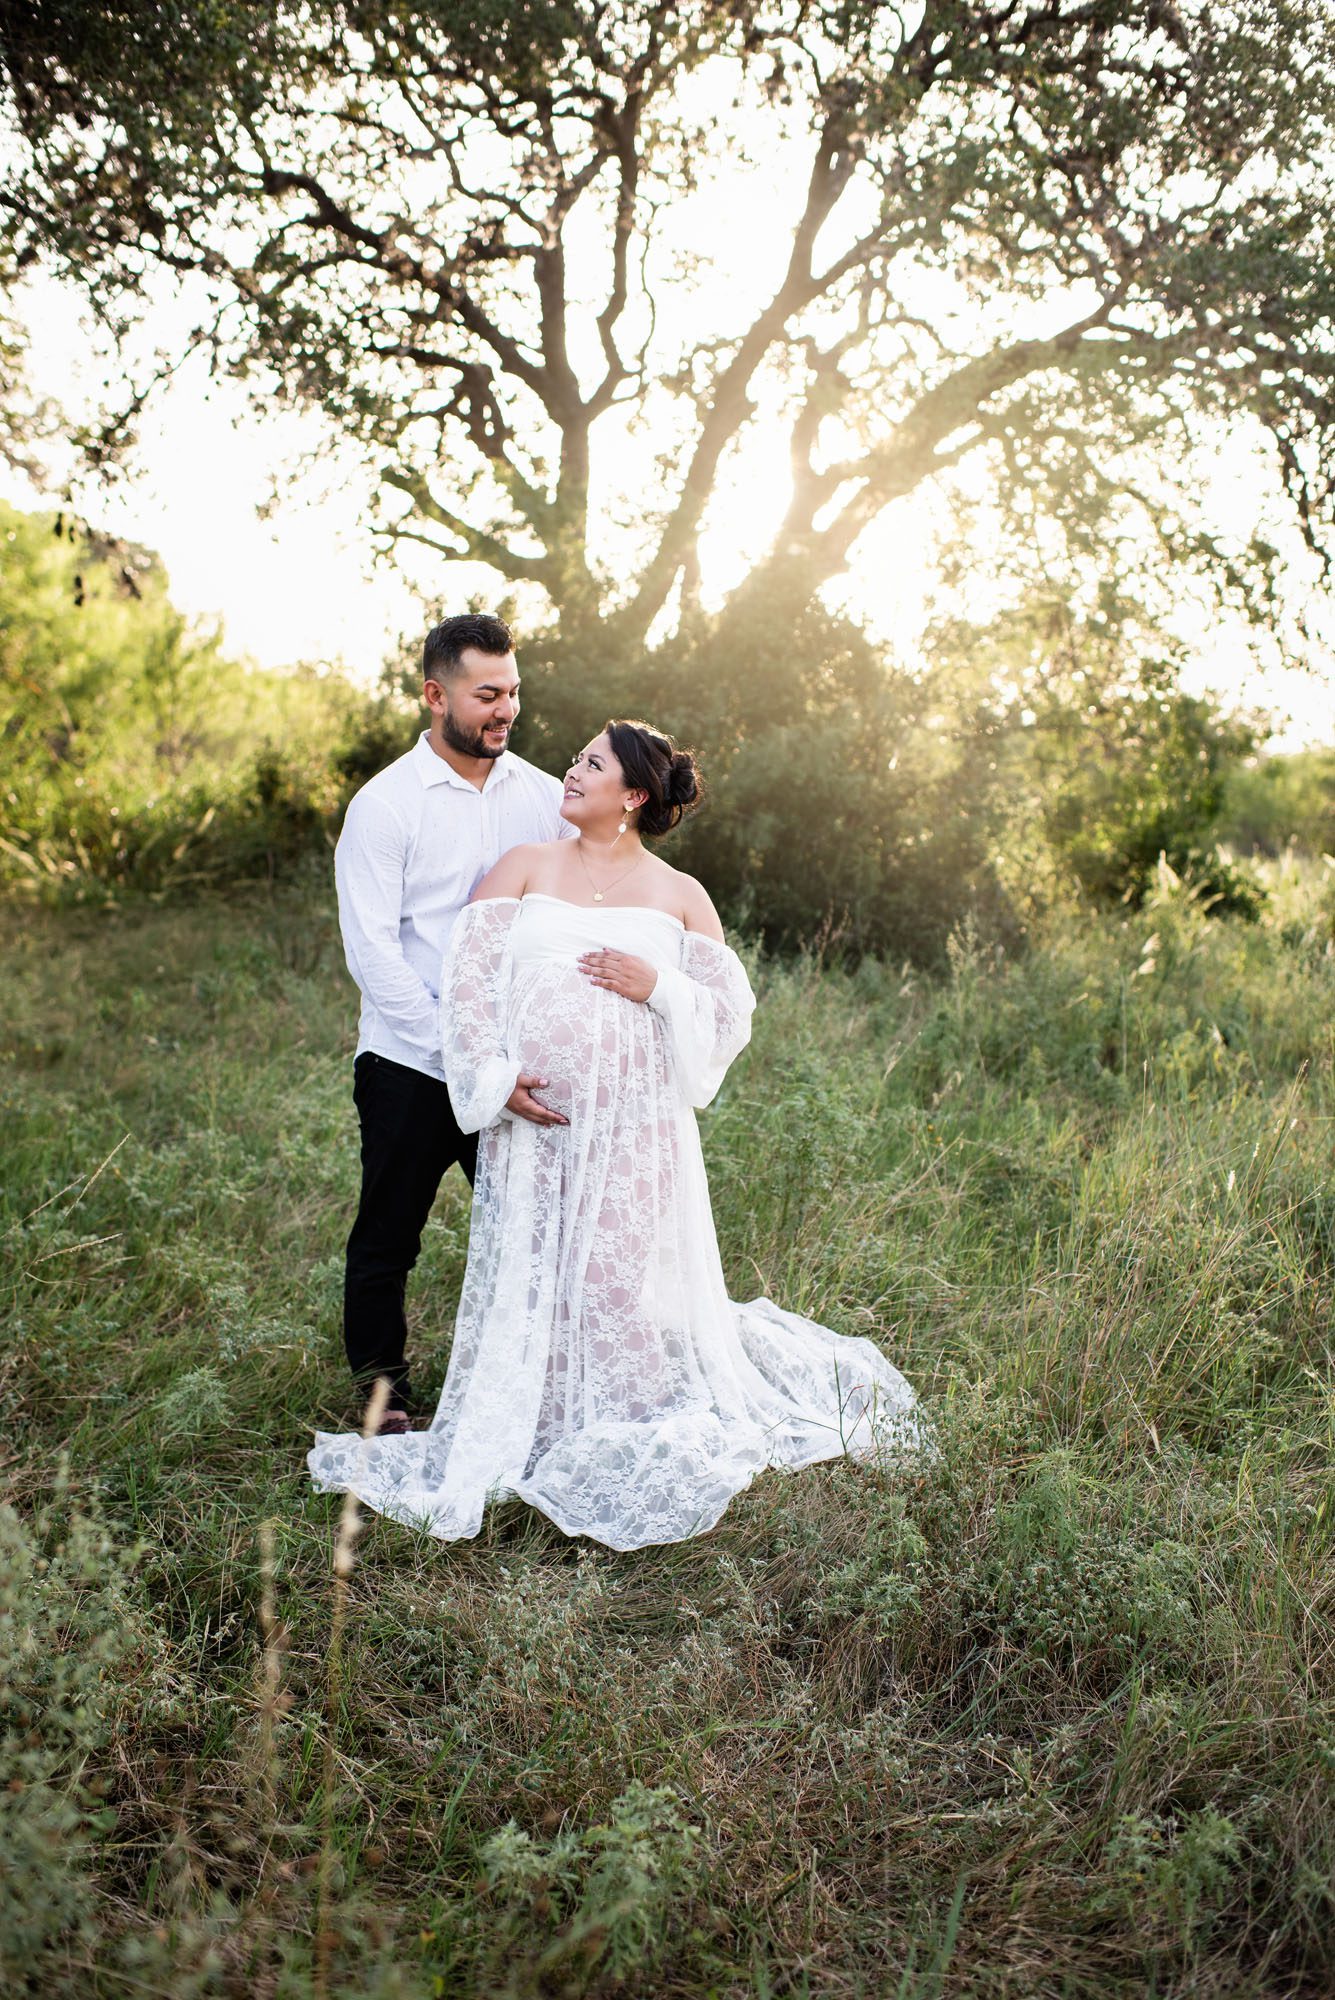 Expectant couple looking at each other lovingly, San Antonio maternity lifestyle photographer